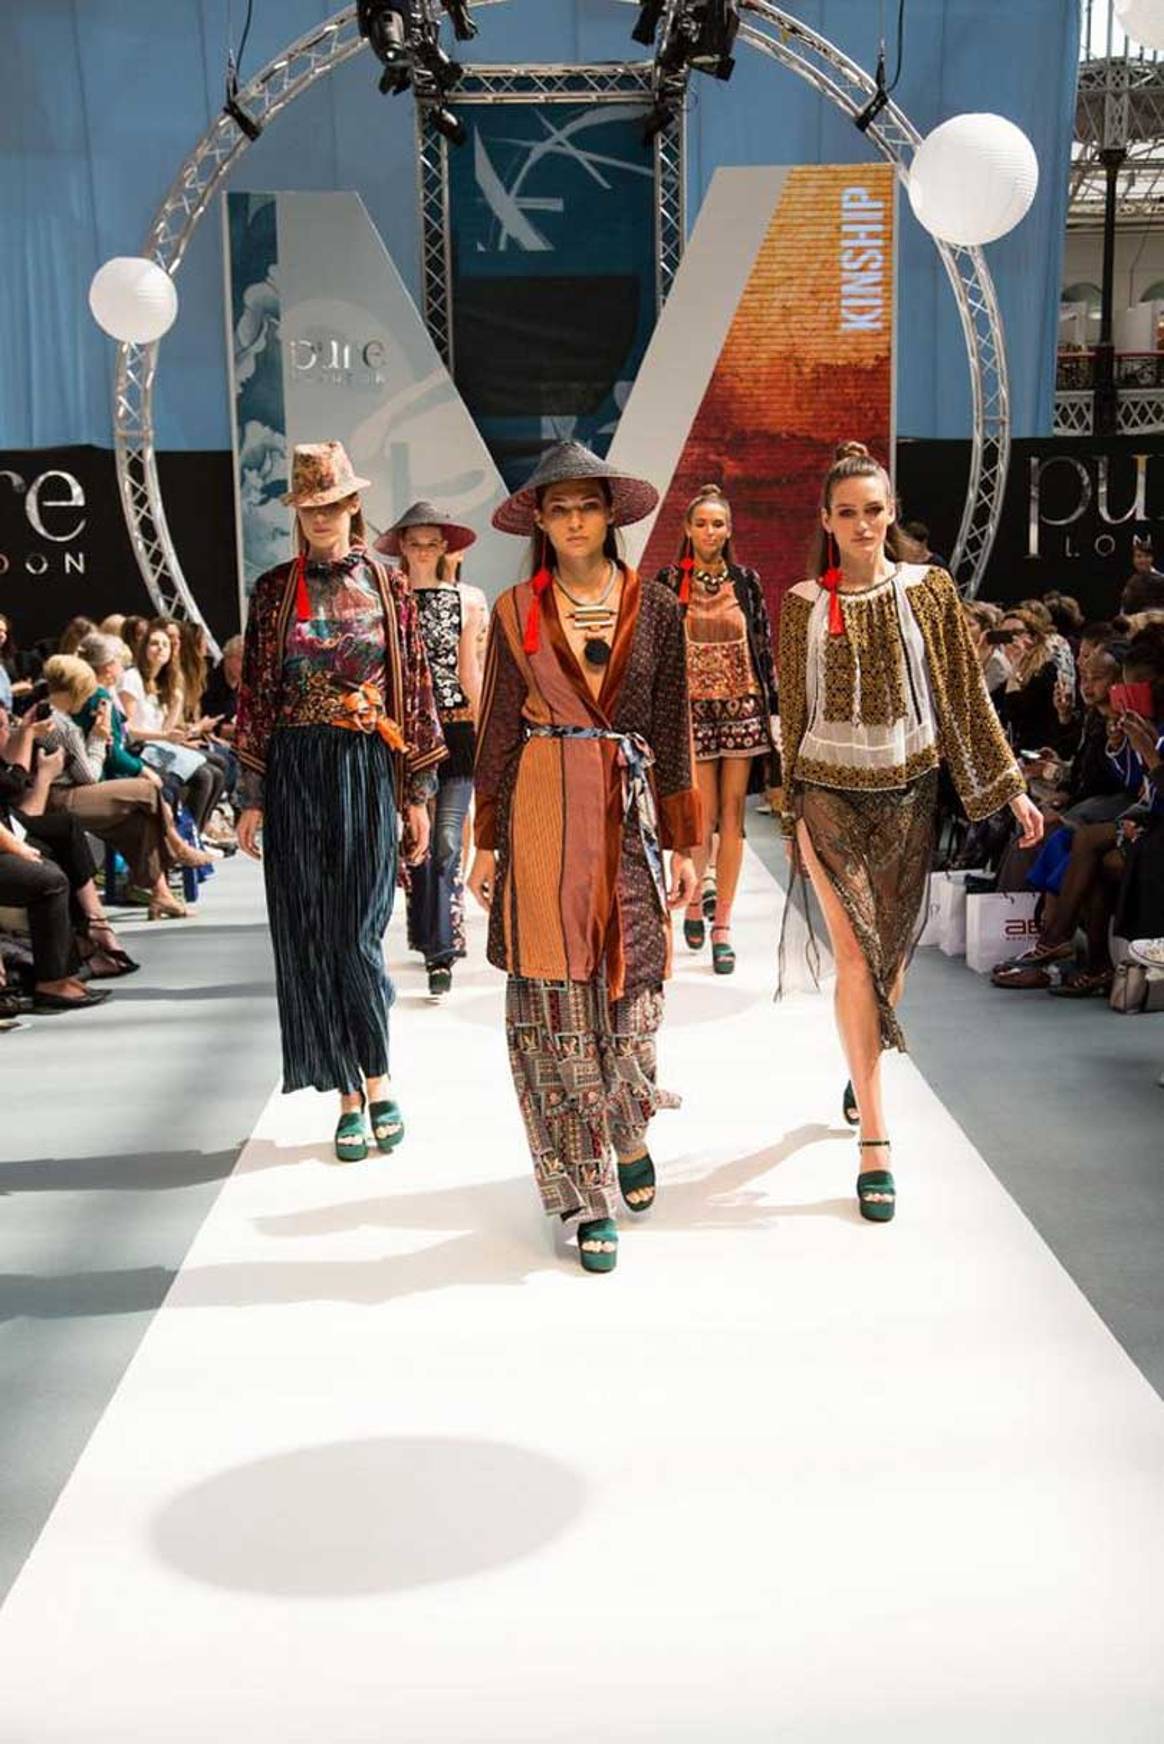 Q&A with Julie Driscoll, Managing Director at Pure London